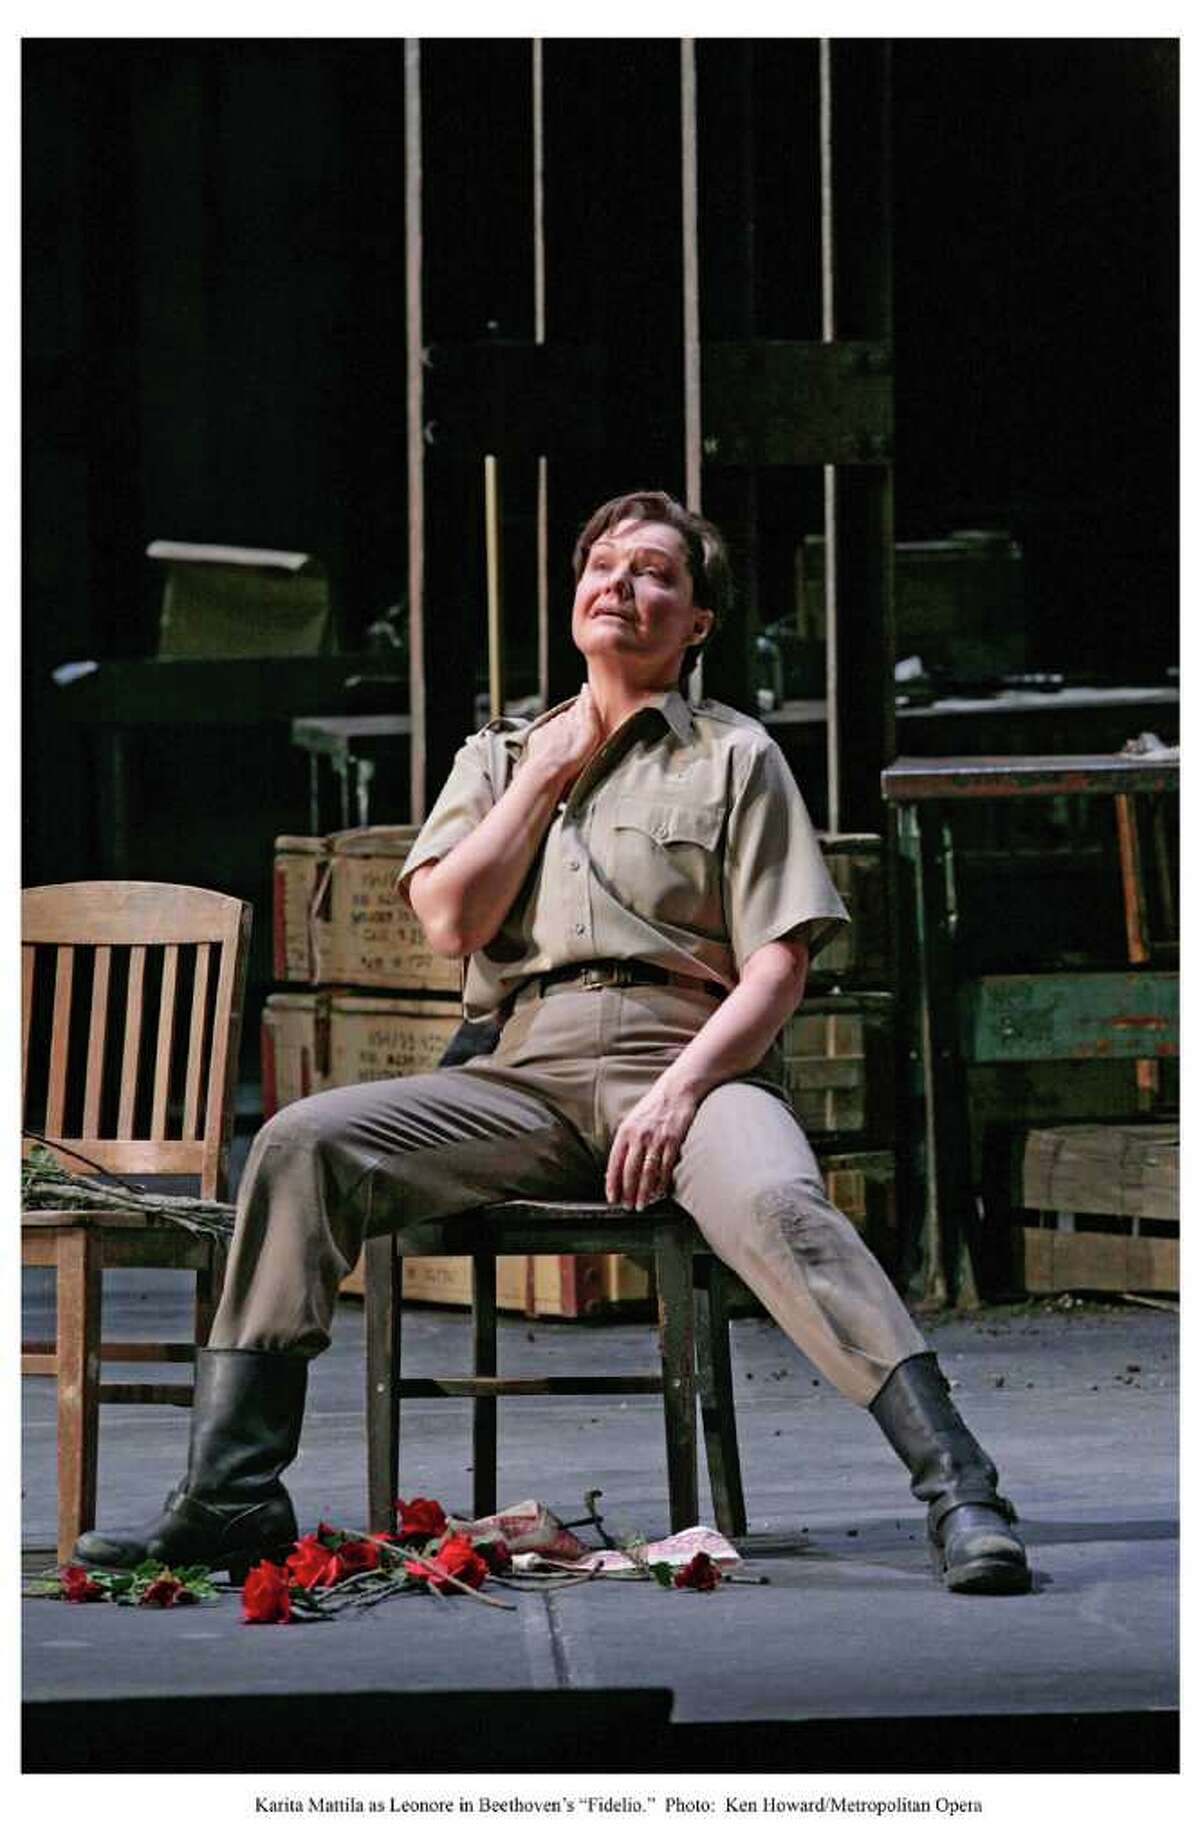 Finnish soprano Karita Mattila stars in the title role in "Fidelio," Beethoven's only opera, for Houston Grand Opera. Disguised as a prison worker, she struggles to free her husband from a wrongful imprisonment.